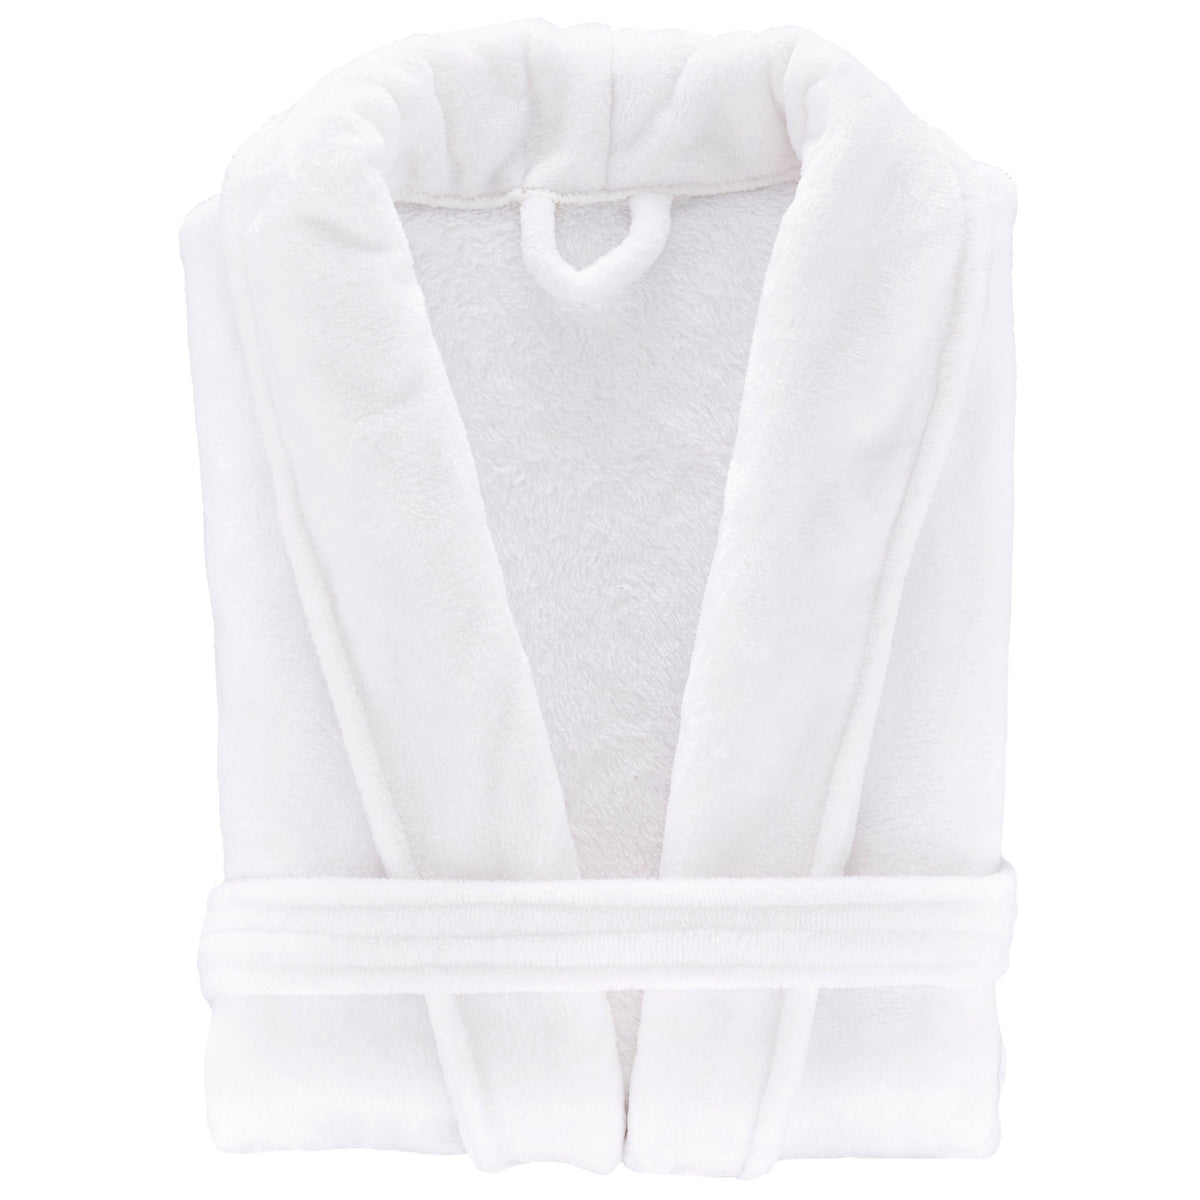 Folded Image of Pine Cone Hill Sheepy Fleece 2.0 Robe in Color White